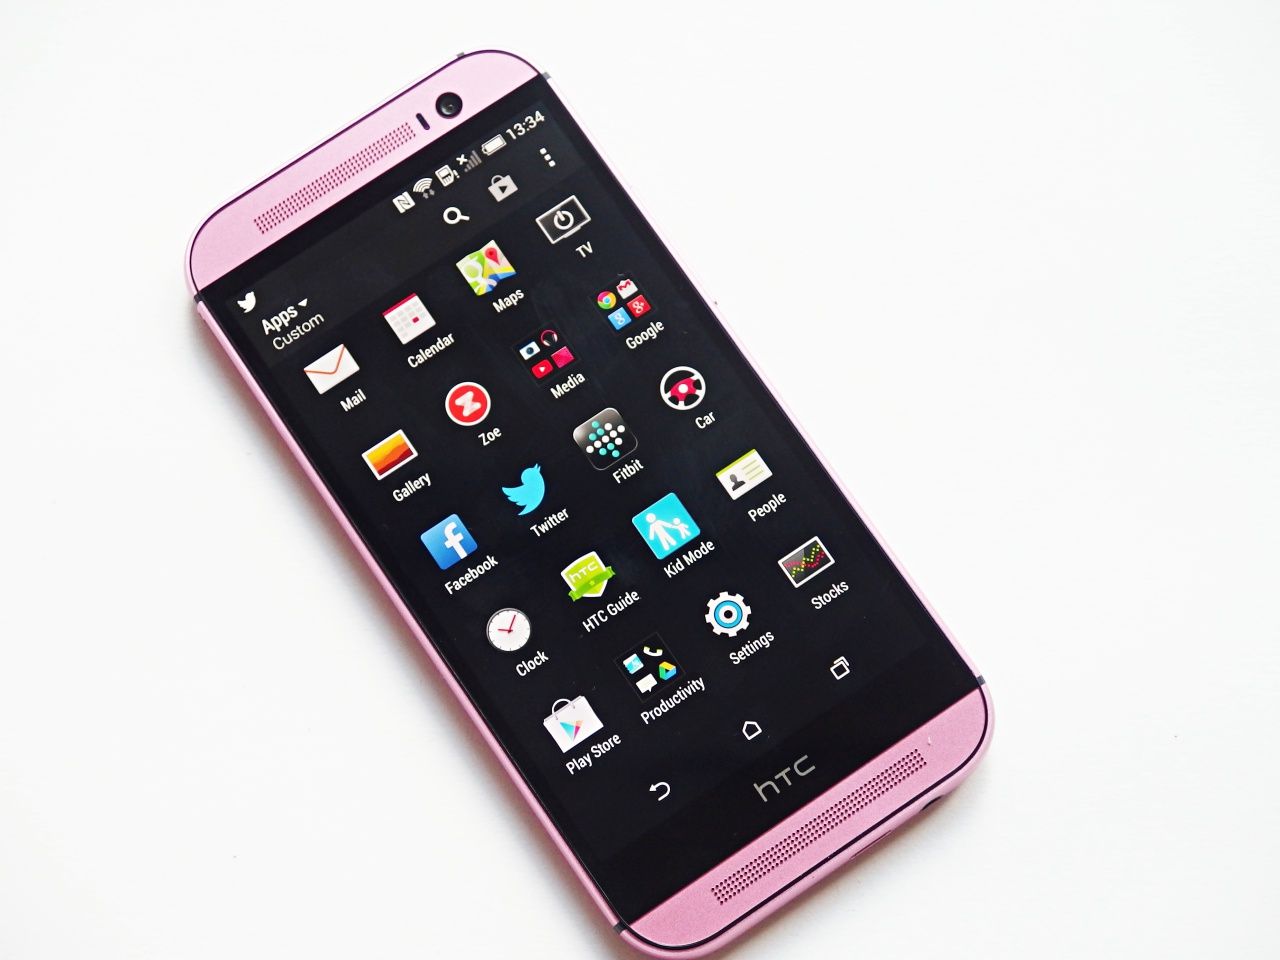 HTC One M8 Pink exclusive to Carphone Warehouse